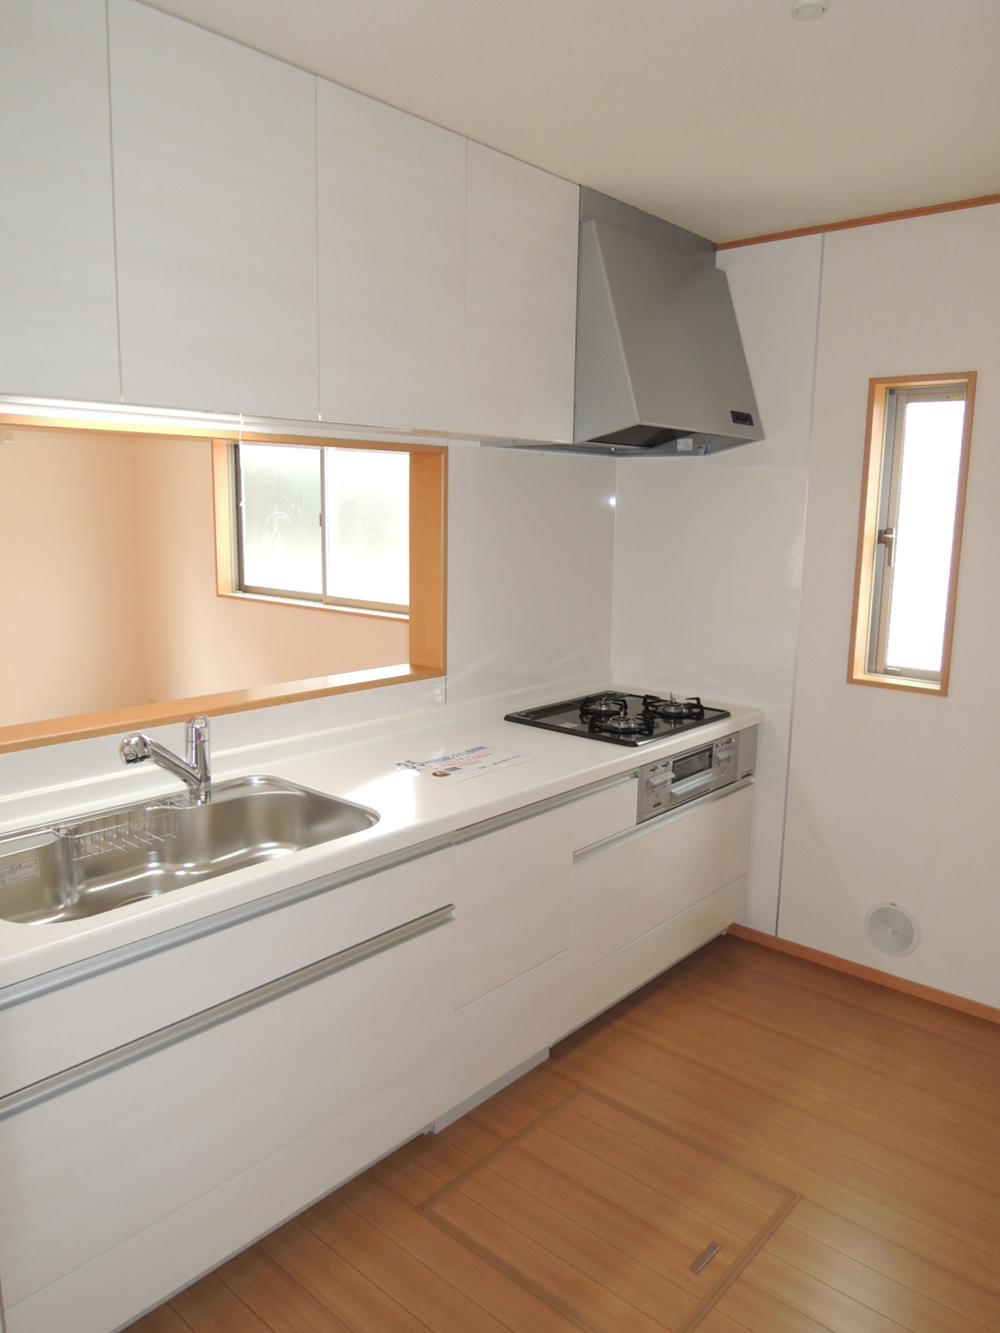 Kitchen. Bright face-to-face kitchen!  ◆ Co., the housing market ◆